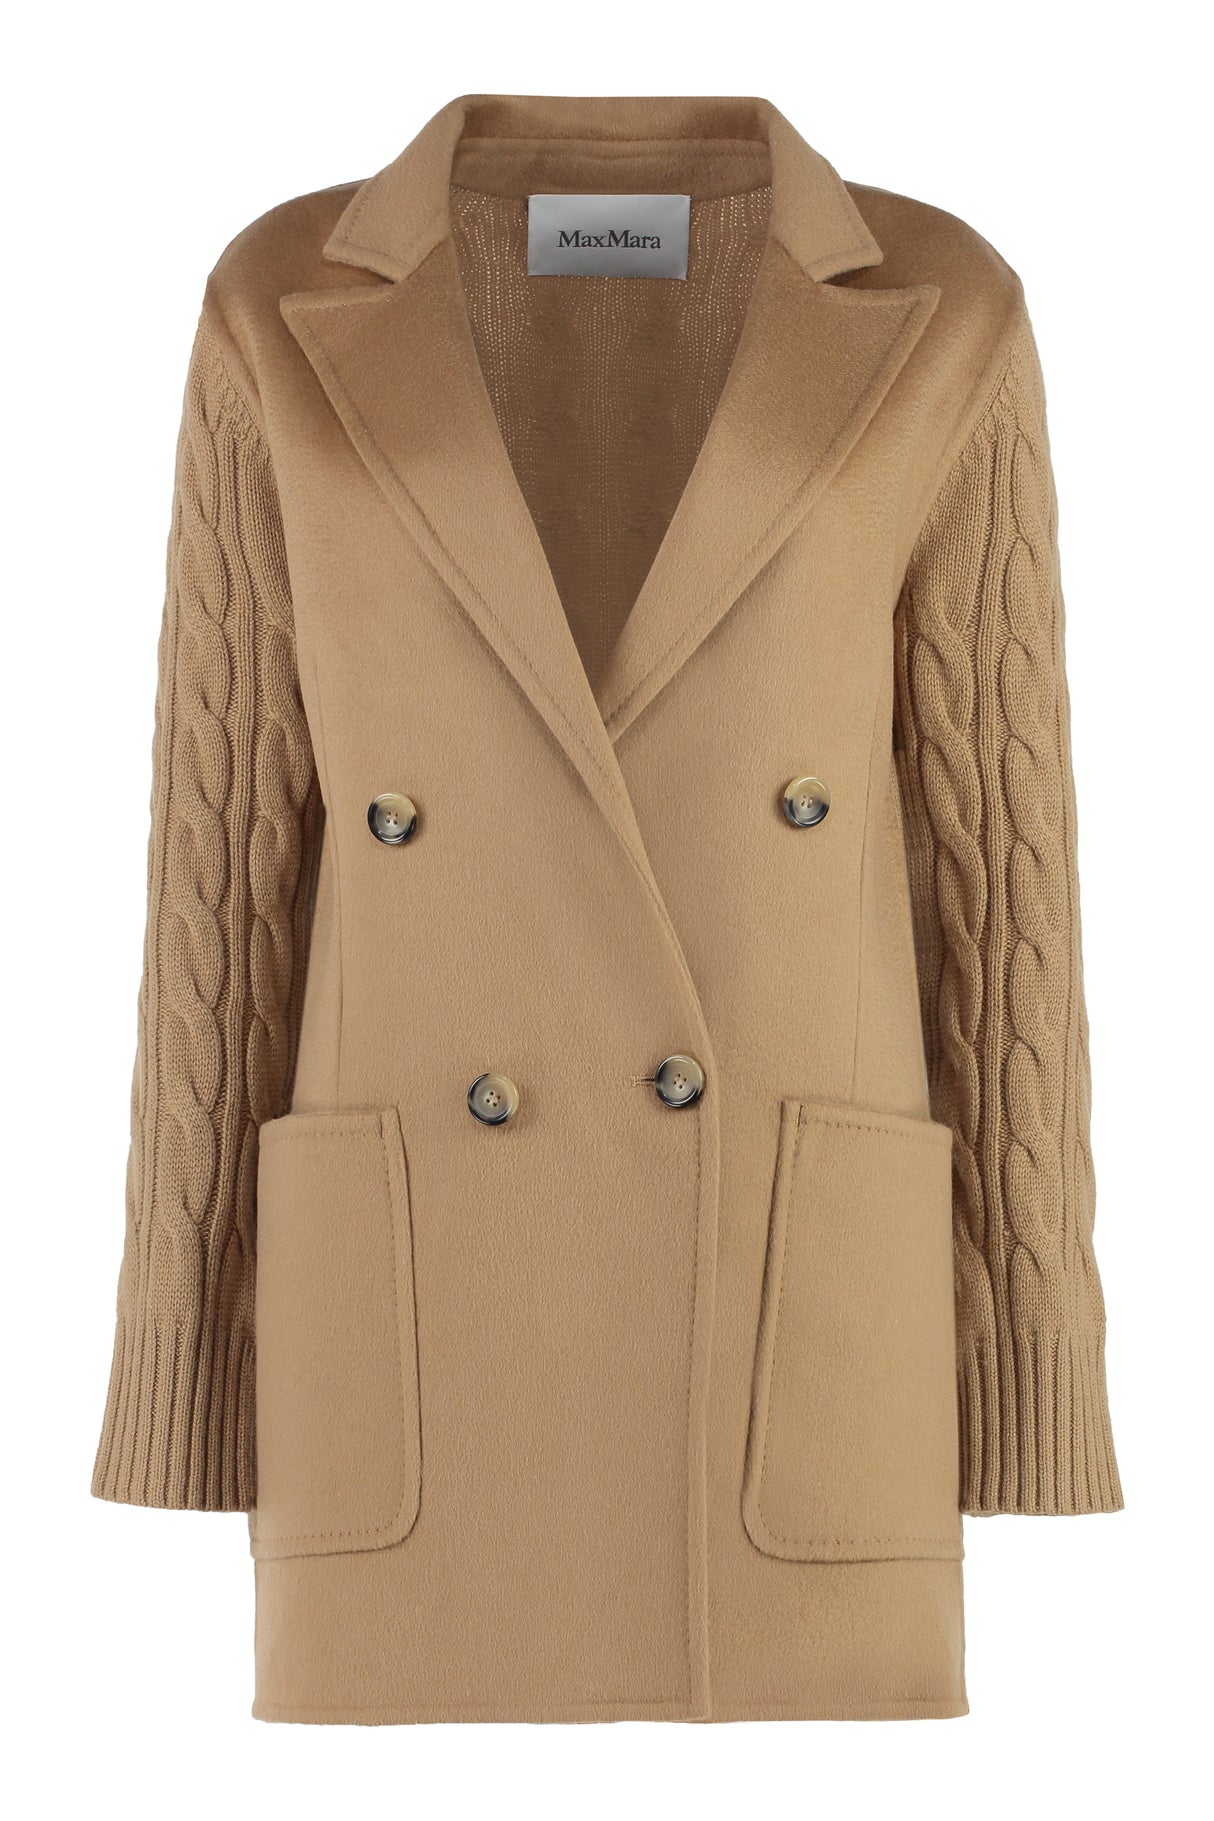 MAX MARA Double-Breasted Brown Cable-Knit Jacket with Horn Buttons